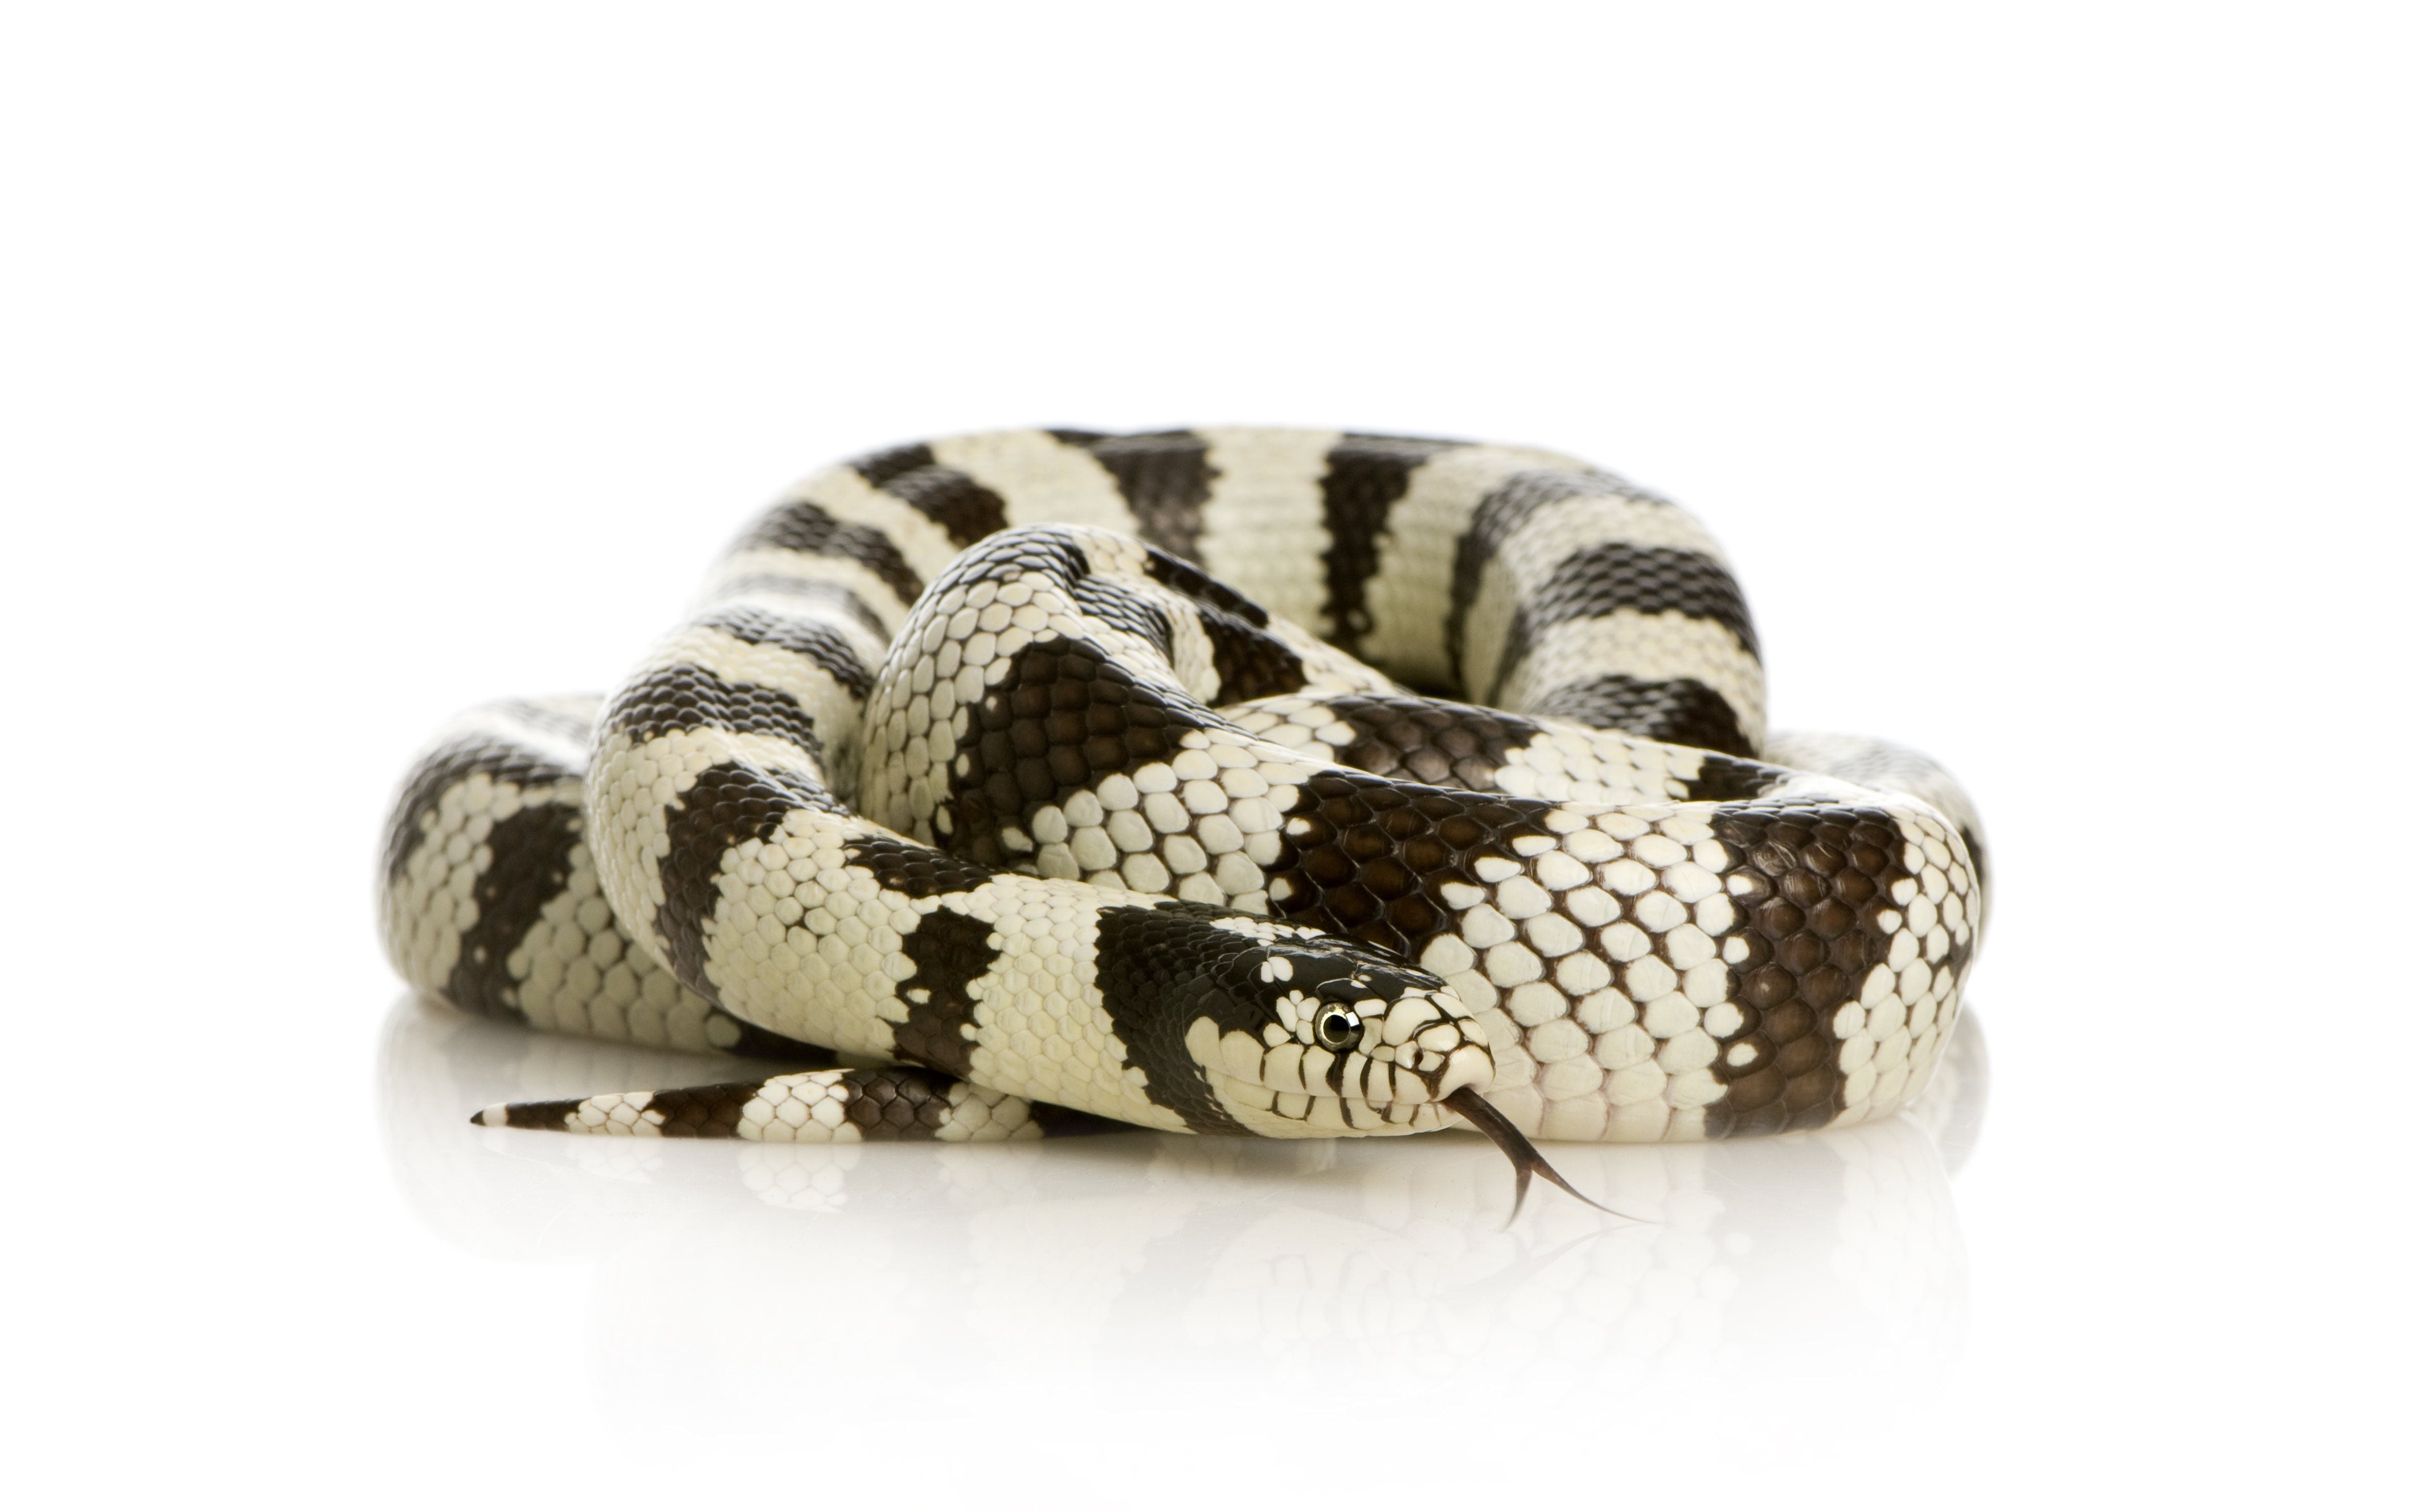 which is the best humid reader for ball pythons enclosure? 1 saw